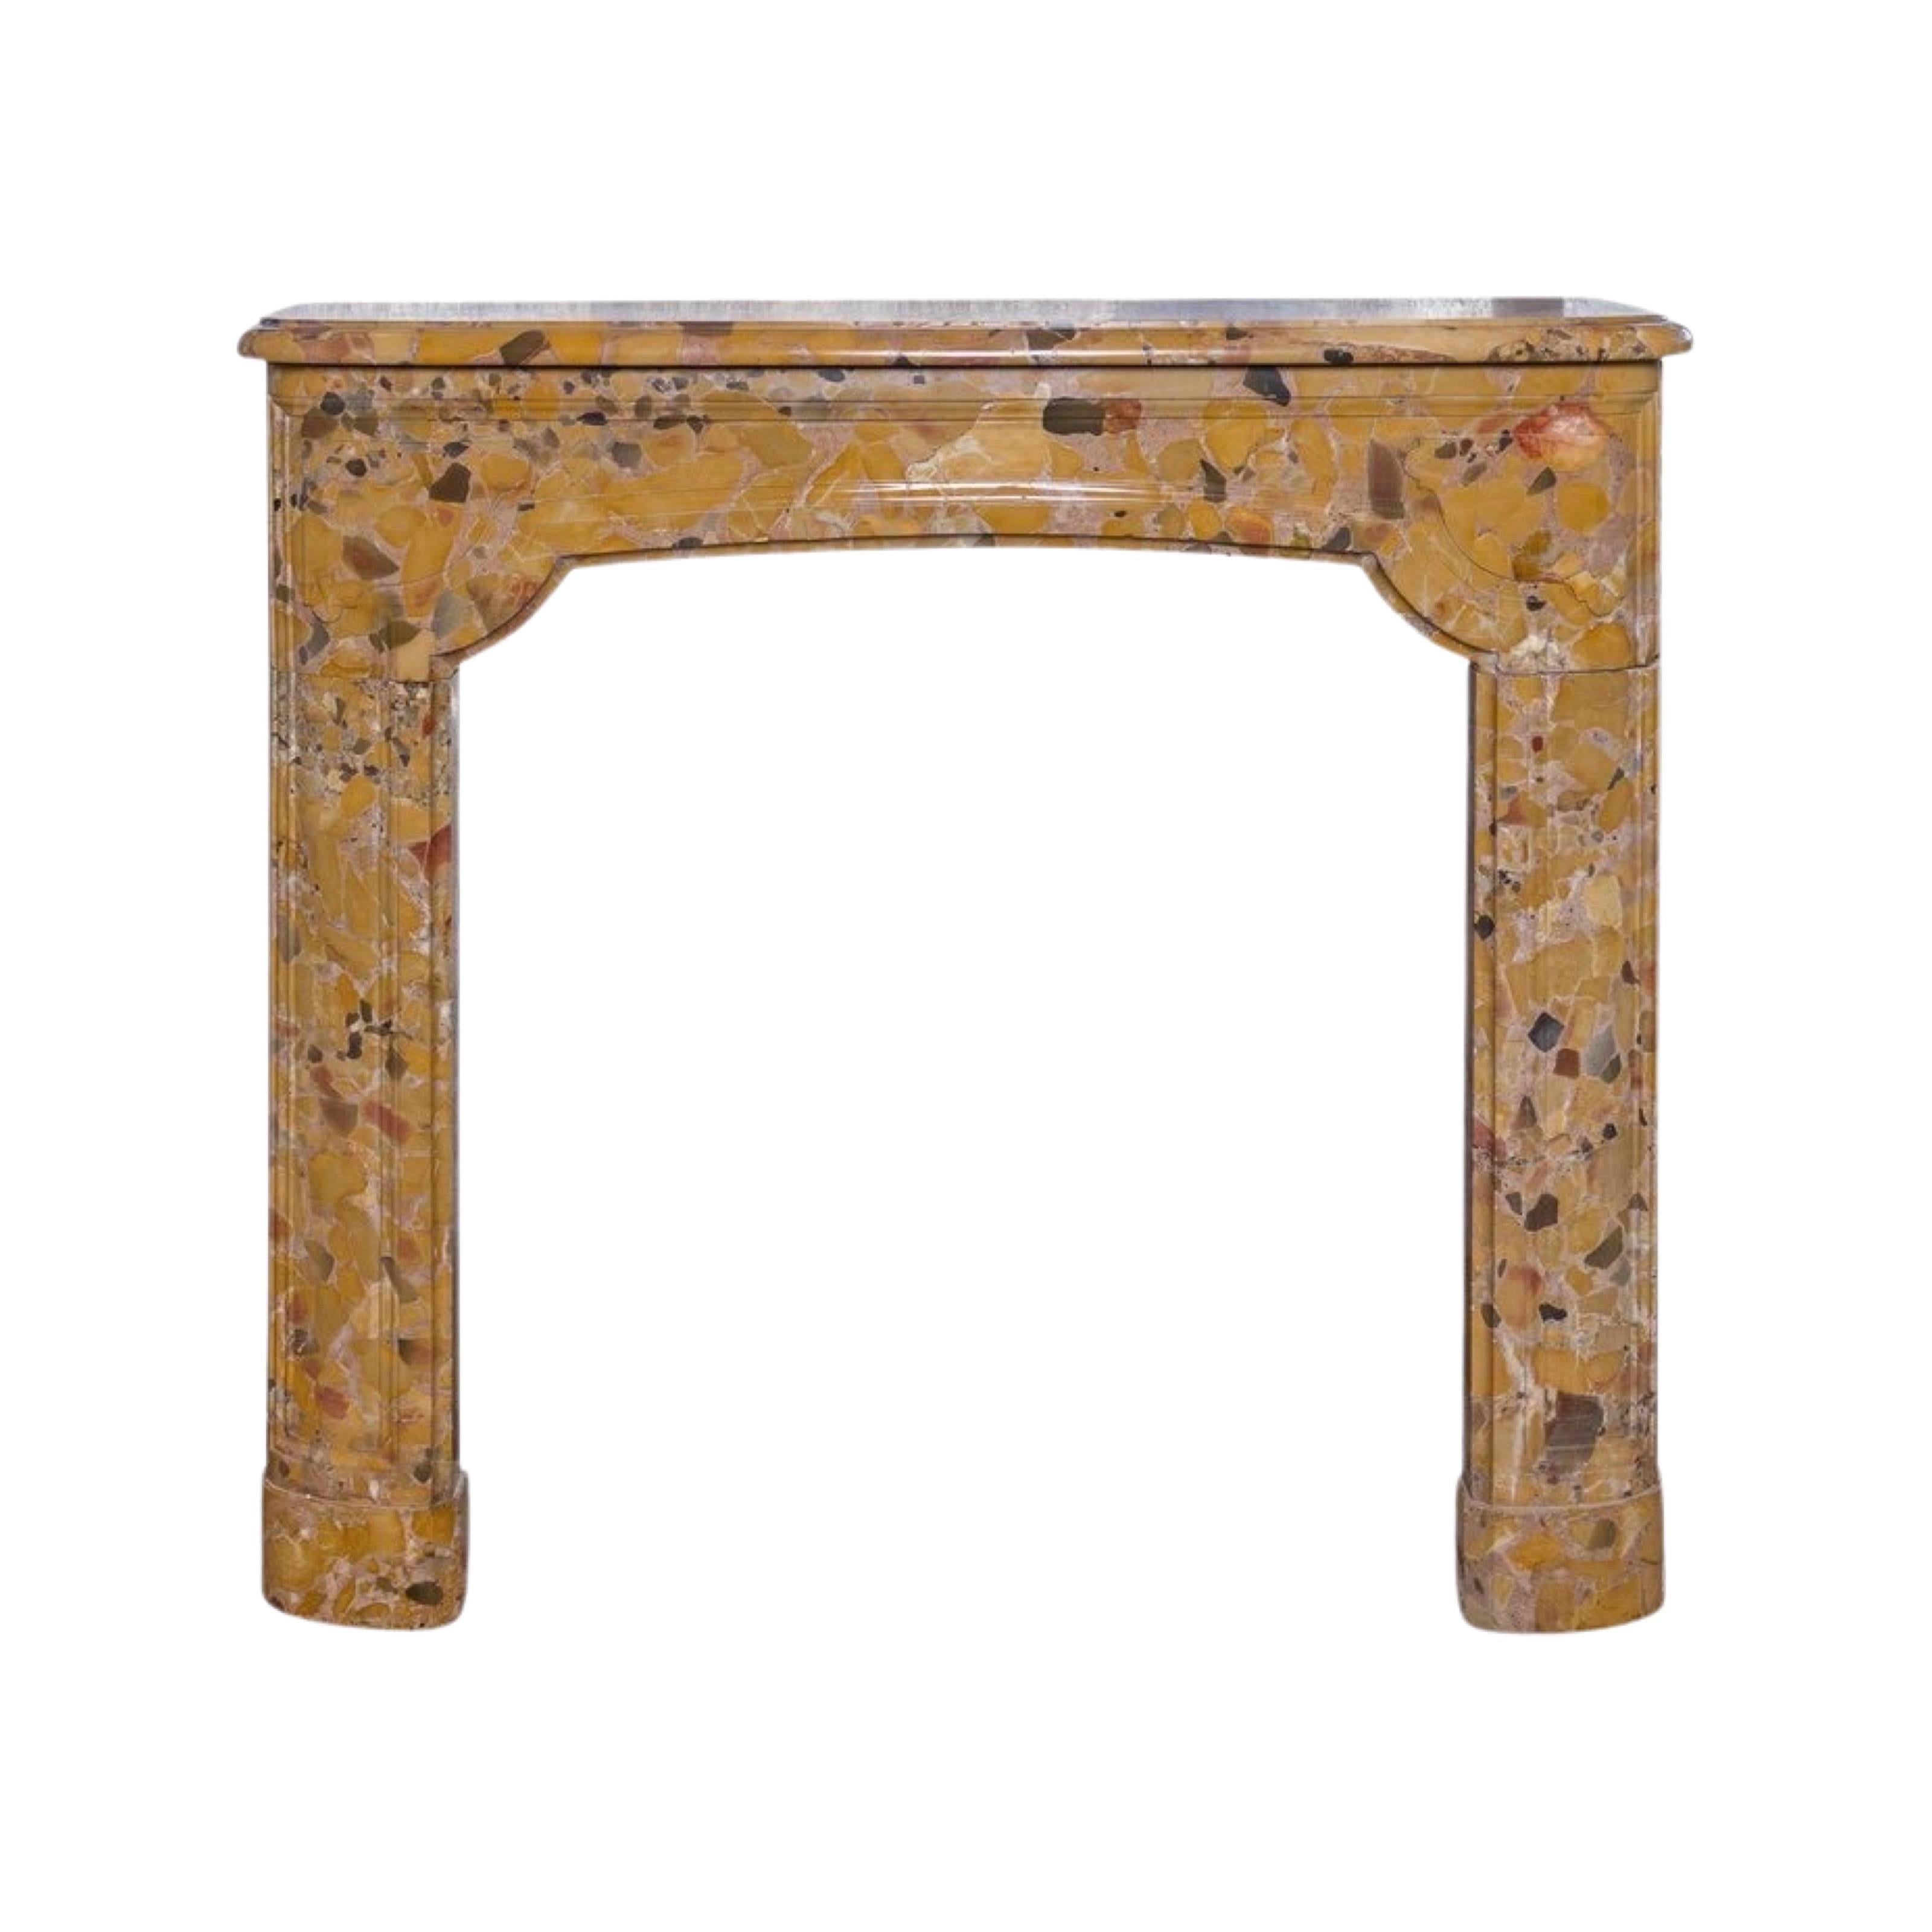 This petite chamber-sized mantel is carved in the style of Louis XIV with doucine molding on the front of the traverse and of the legs. The shelf front and sides demonstrate 1.25